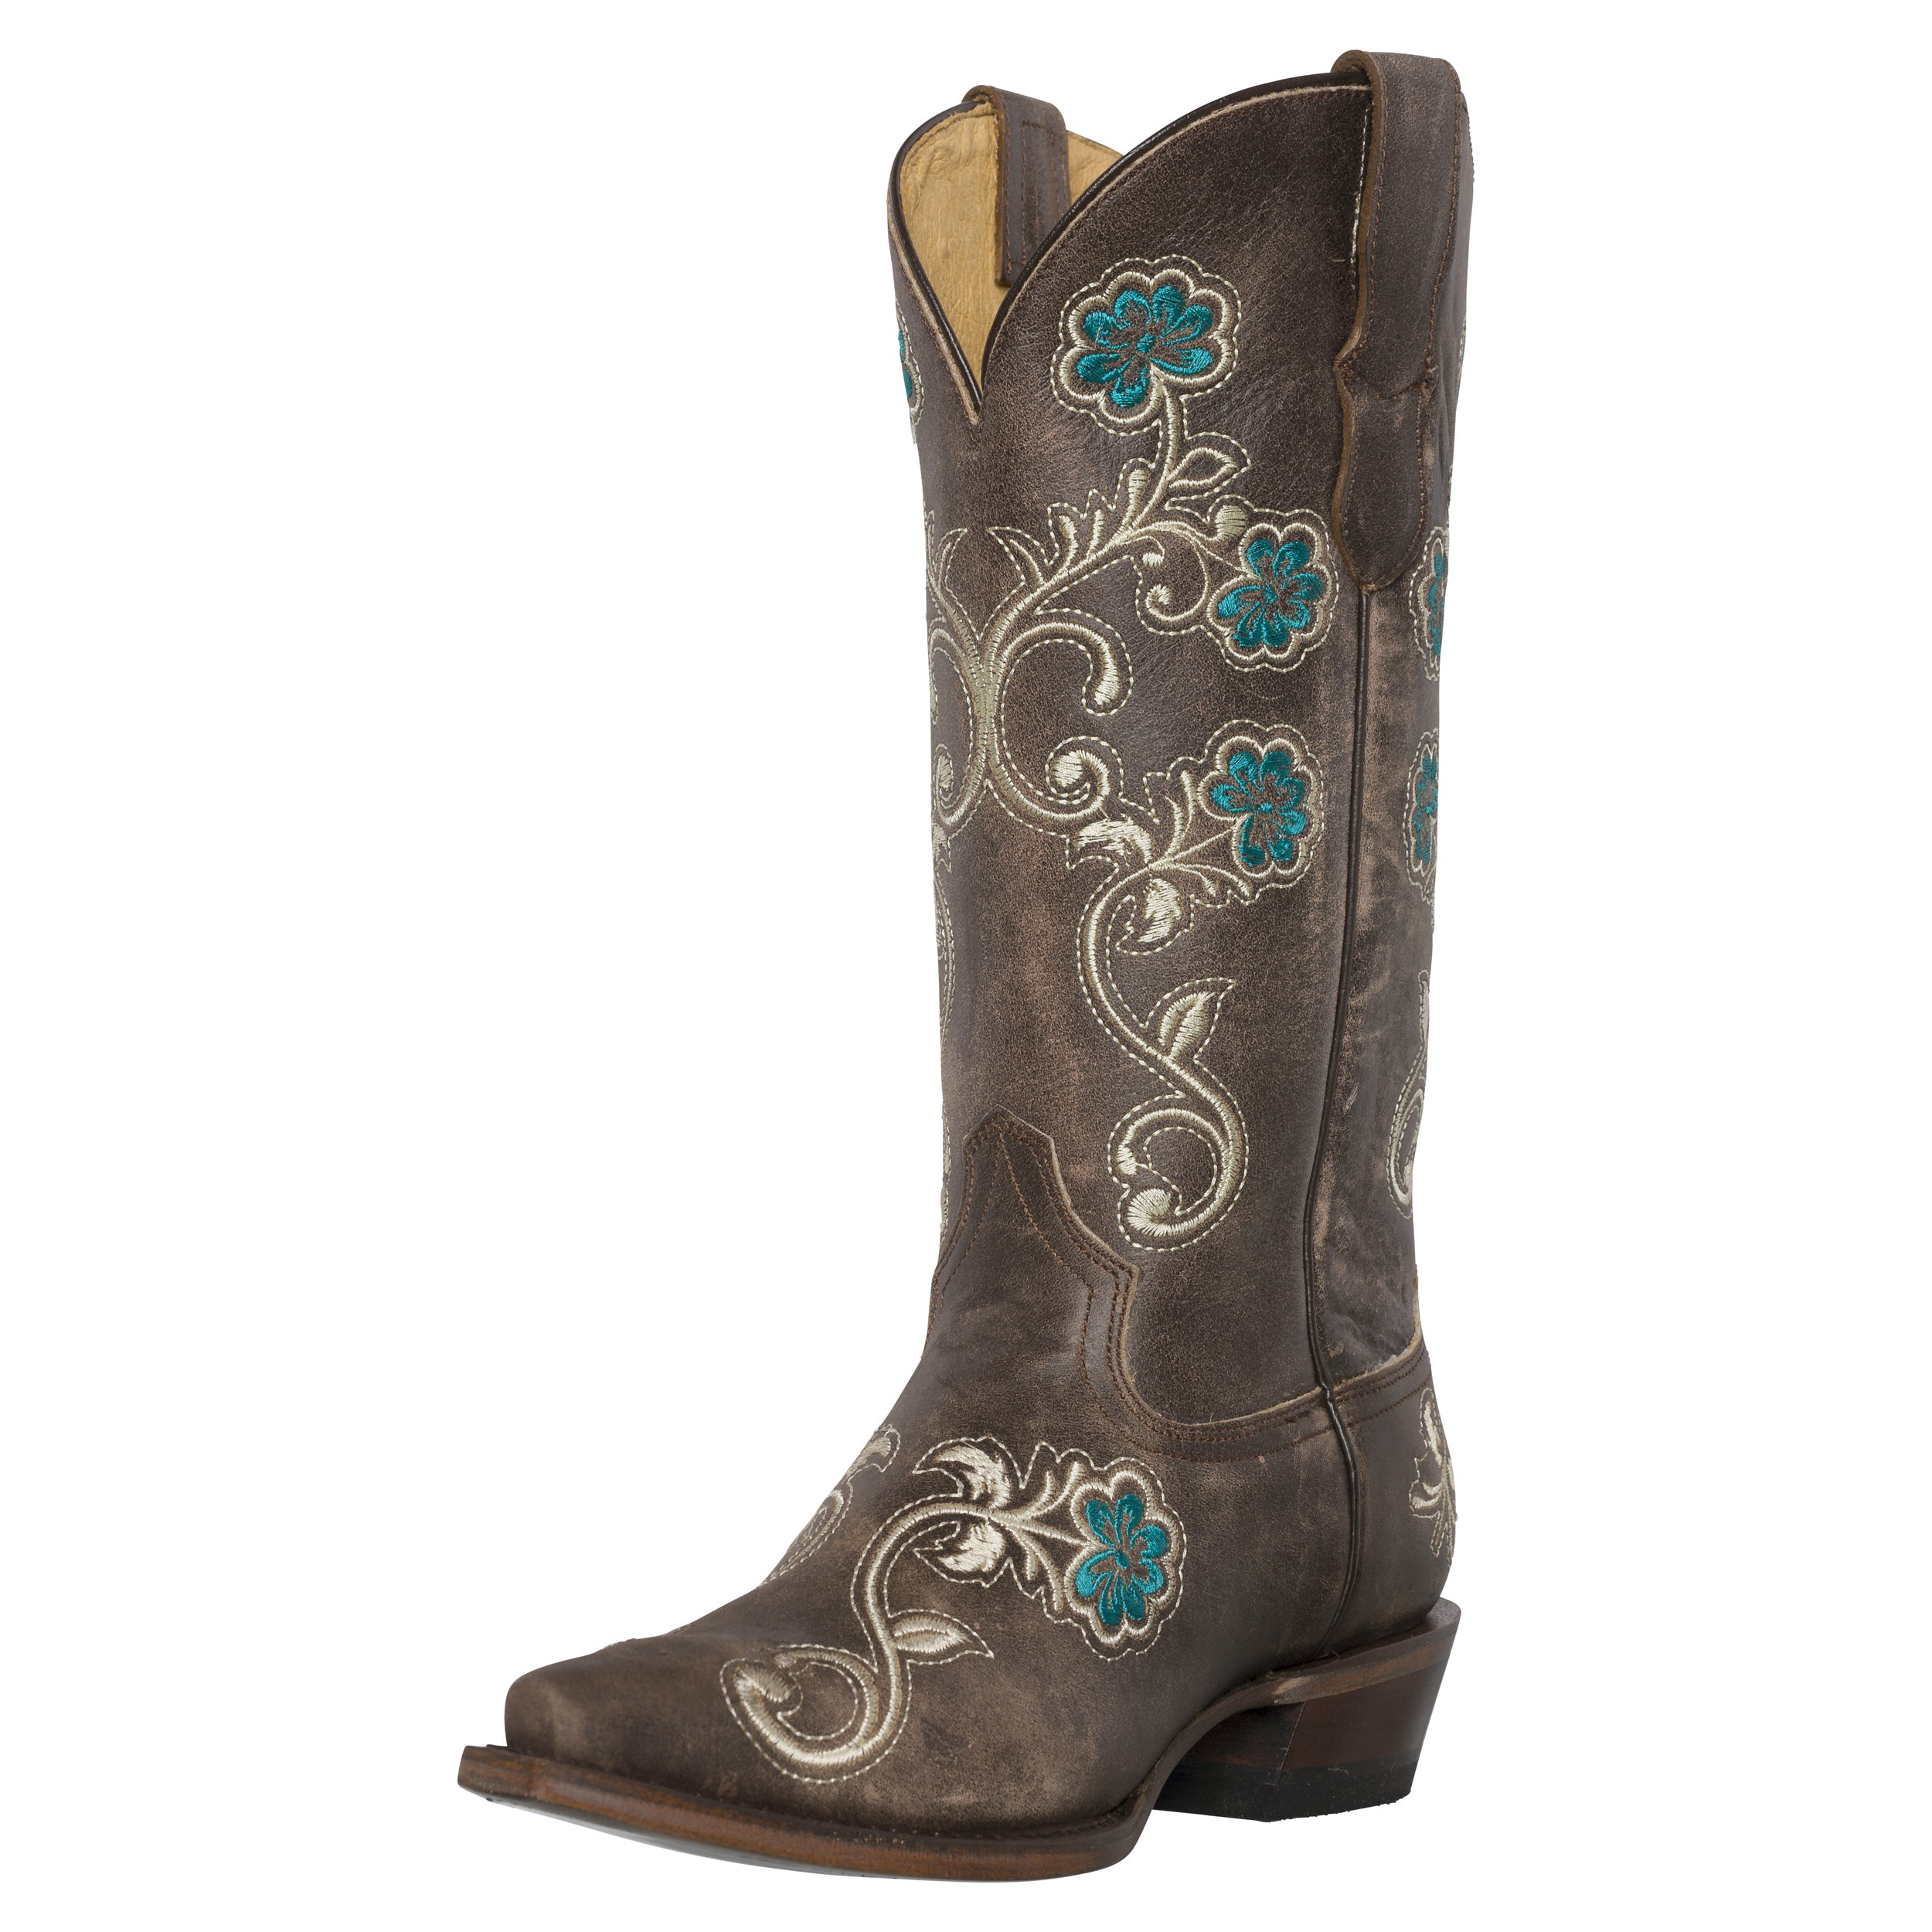 Women's Western Cowgirl Cowboy Boot | Red Cimmaron Round Toe by Silver  Canyon